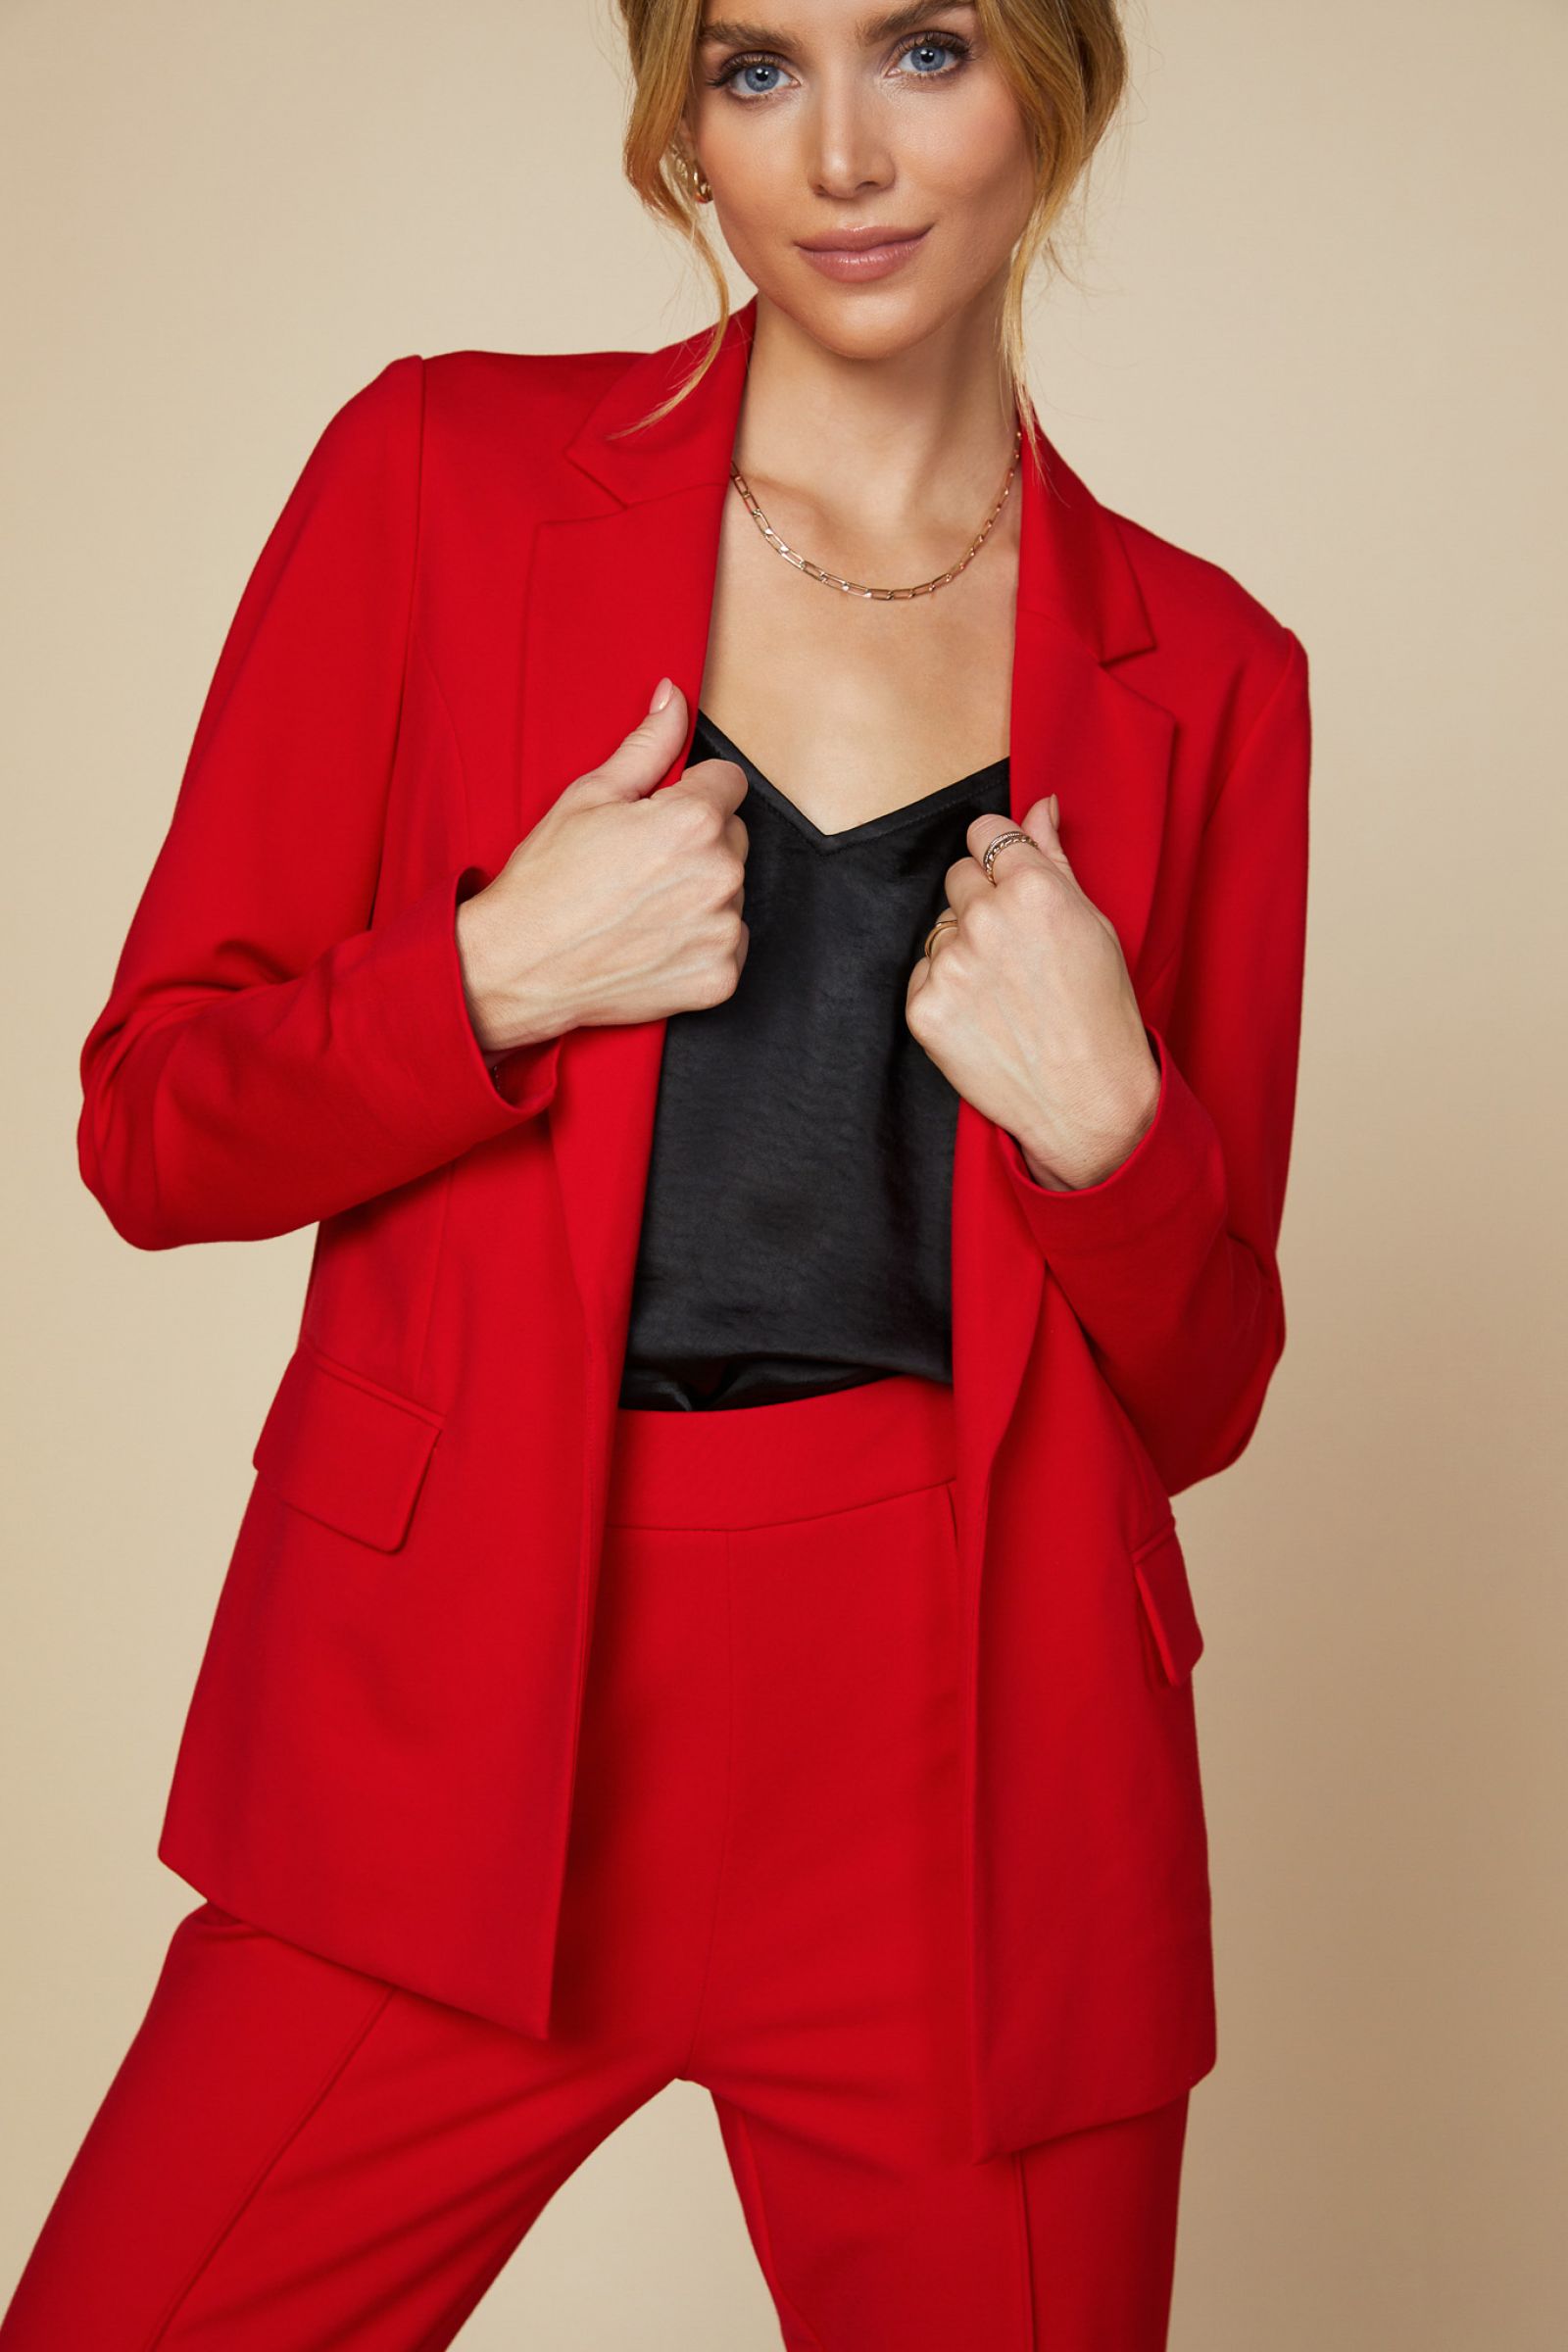 Knit Long Sleeve Red Blazer Jacket in Scarlet Red is stretch and the perfect way to suit up in a comfort. We love the side pockets and printed inner liner for polished look. Add this powerful color to your wardrobe. Don't forget the matching trousers for a matching set. Relaxed Fit 70% Rayon 25% Polyester 5% Spandex